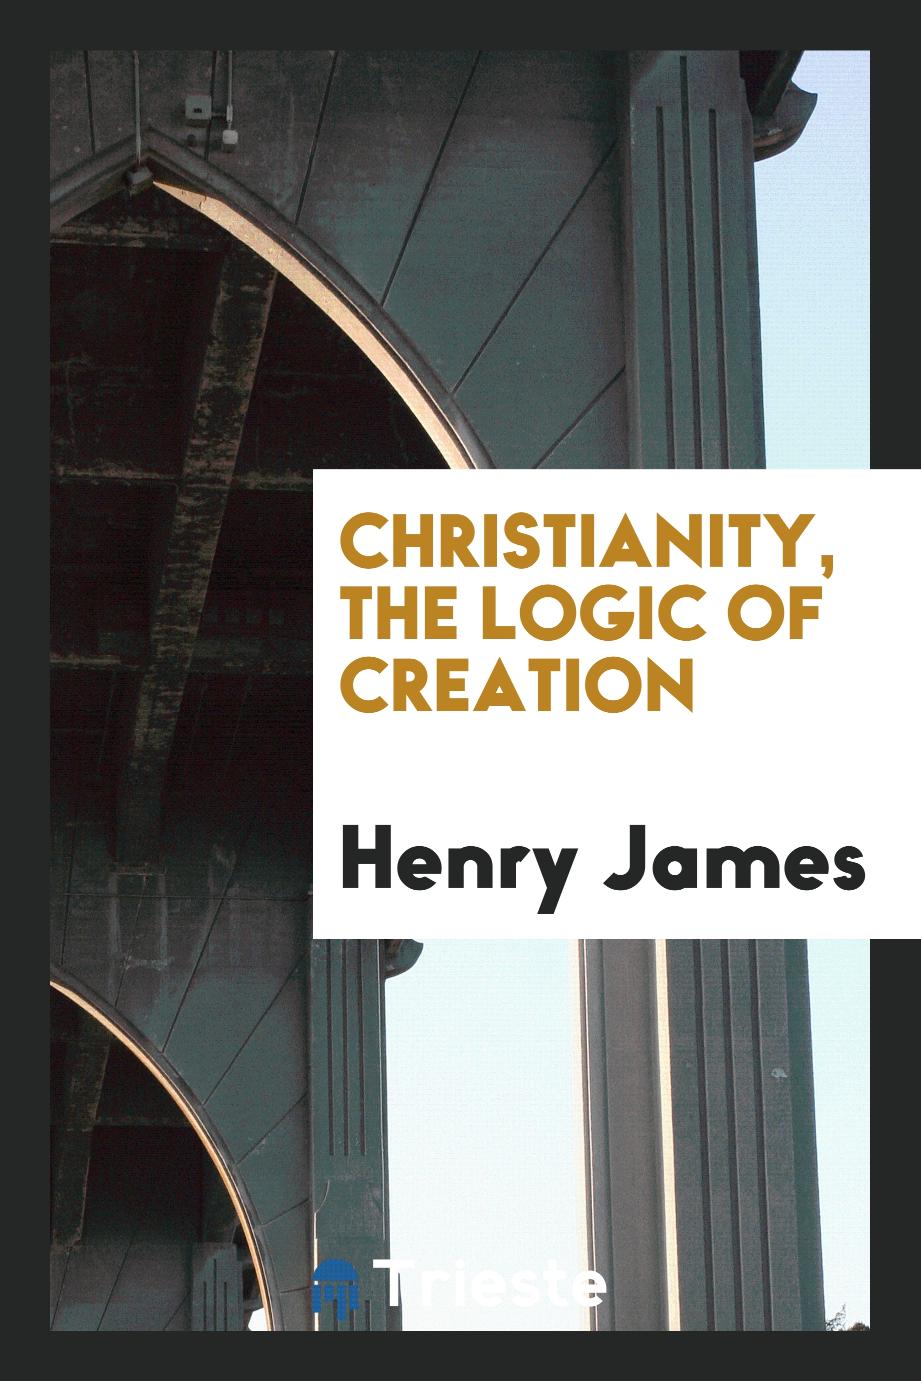 Christianity, the logic of creation